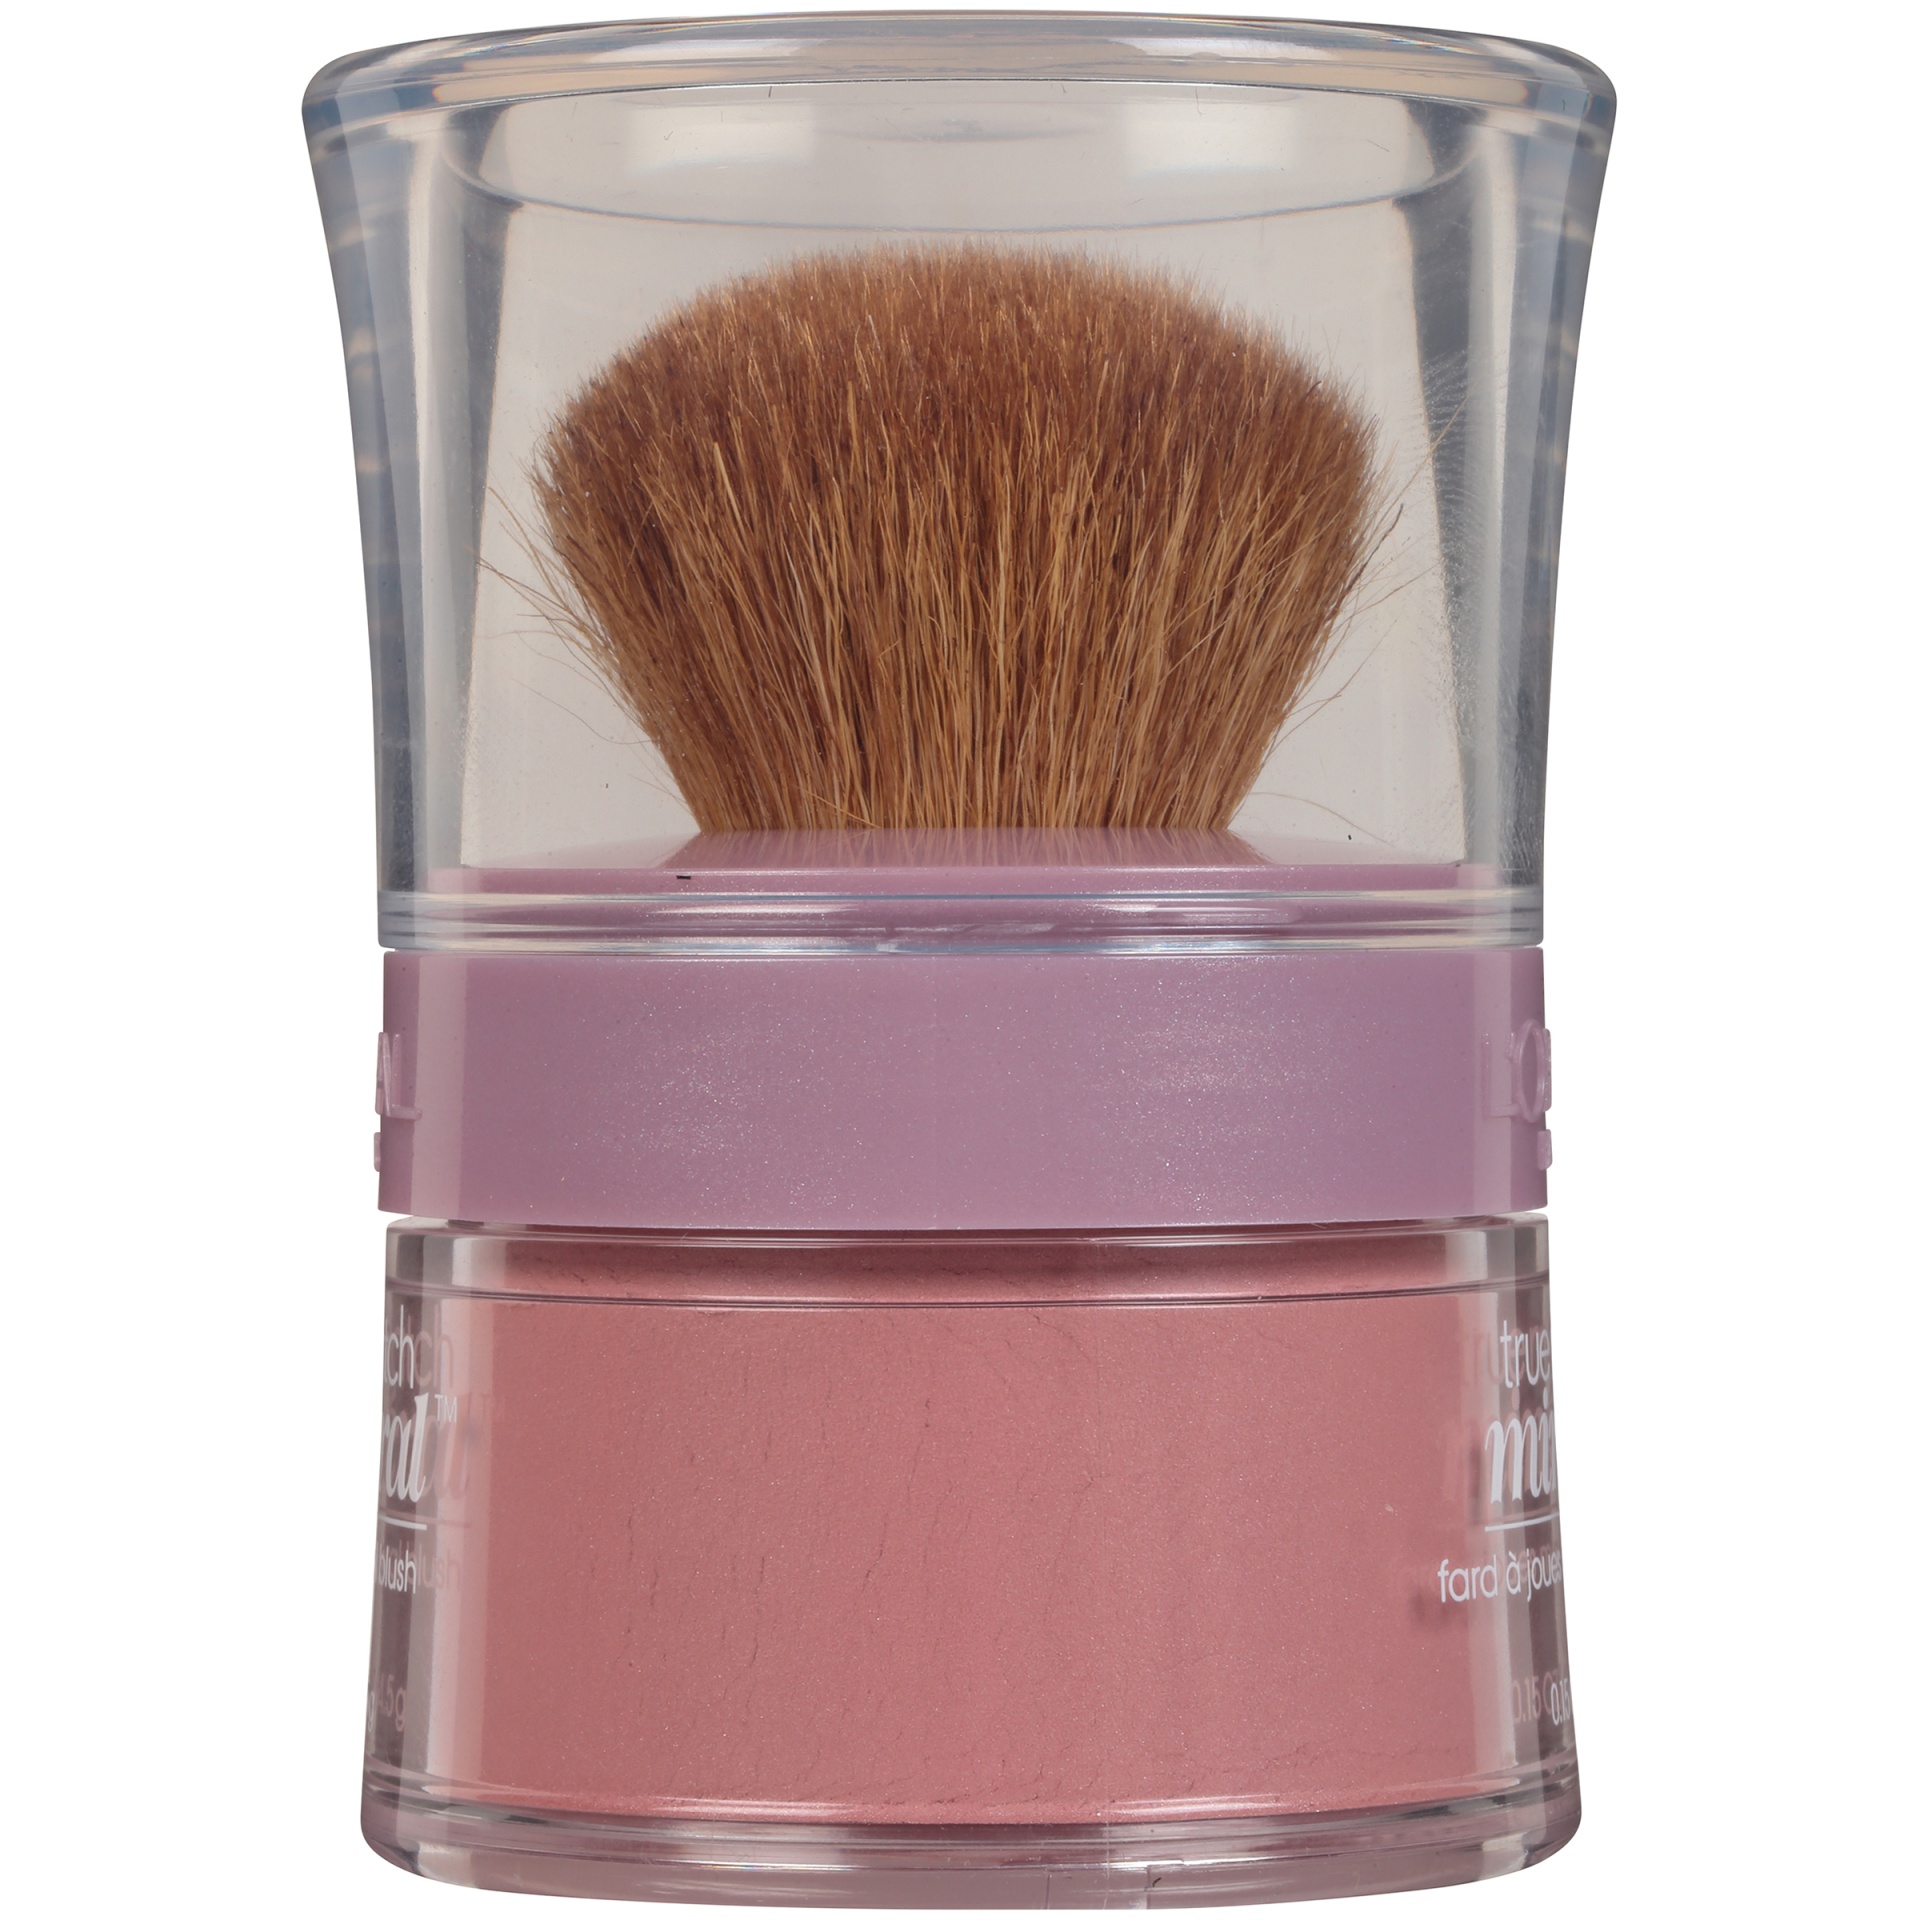 slide 3 of 6, L'Oreal True Match Gentle Mineral Blush - 486 Pinched Pink, 0.15 oz